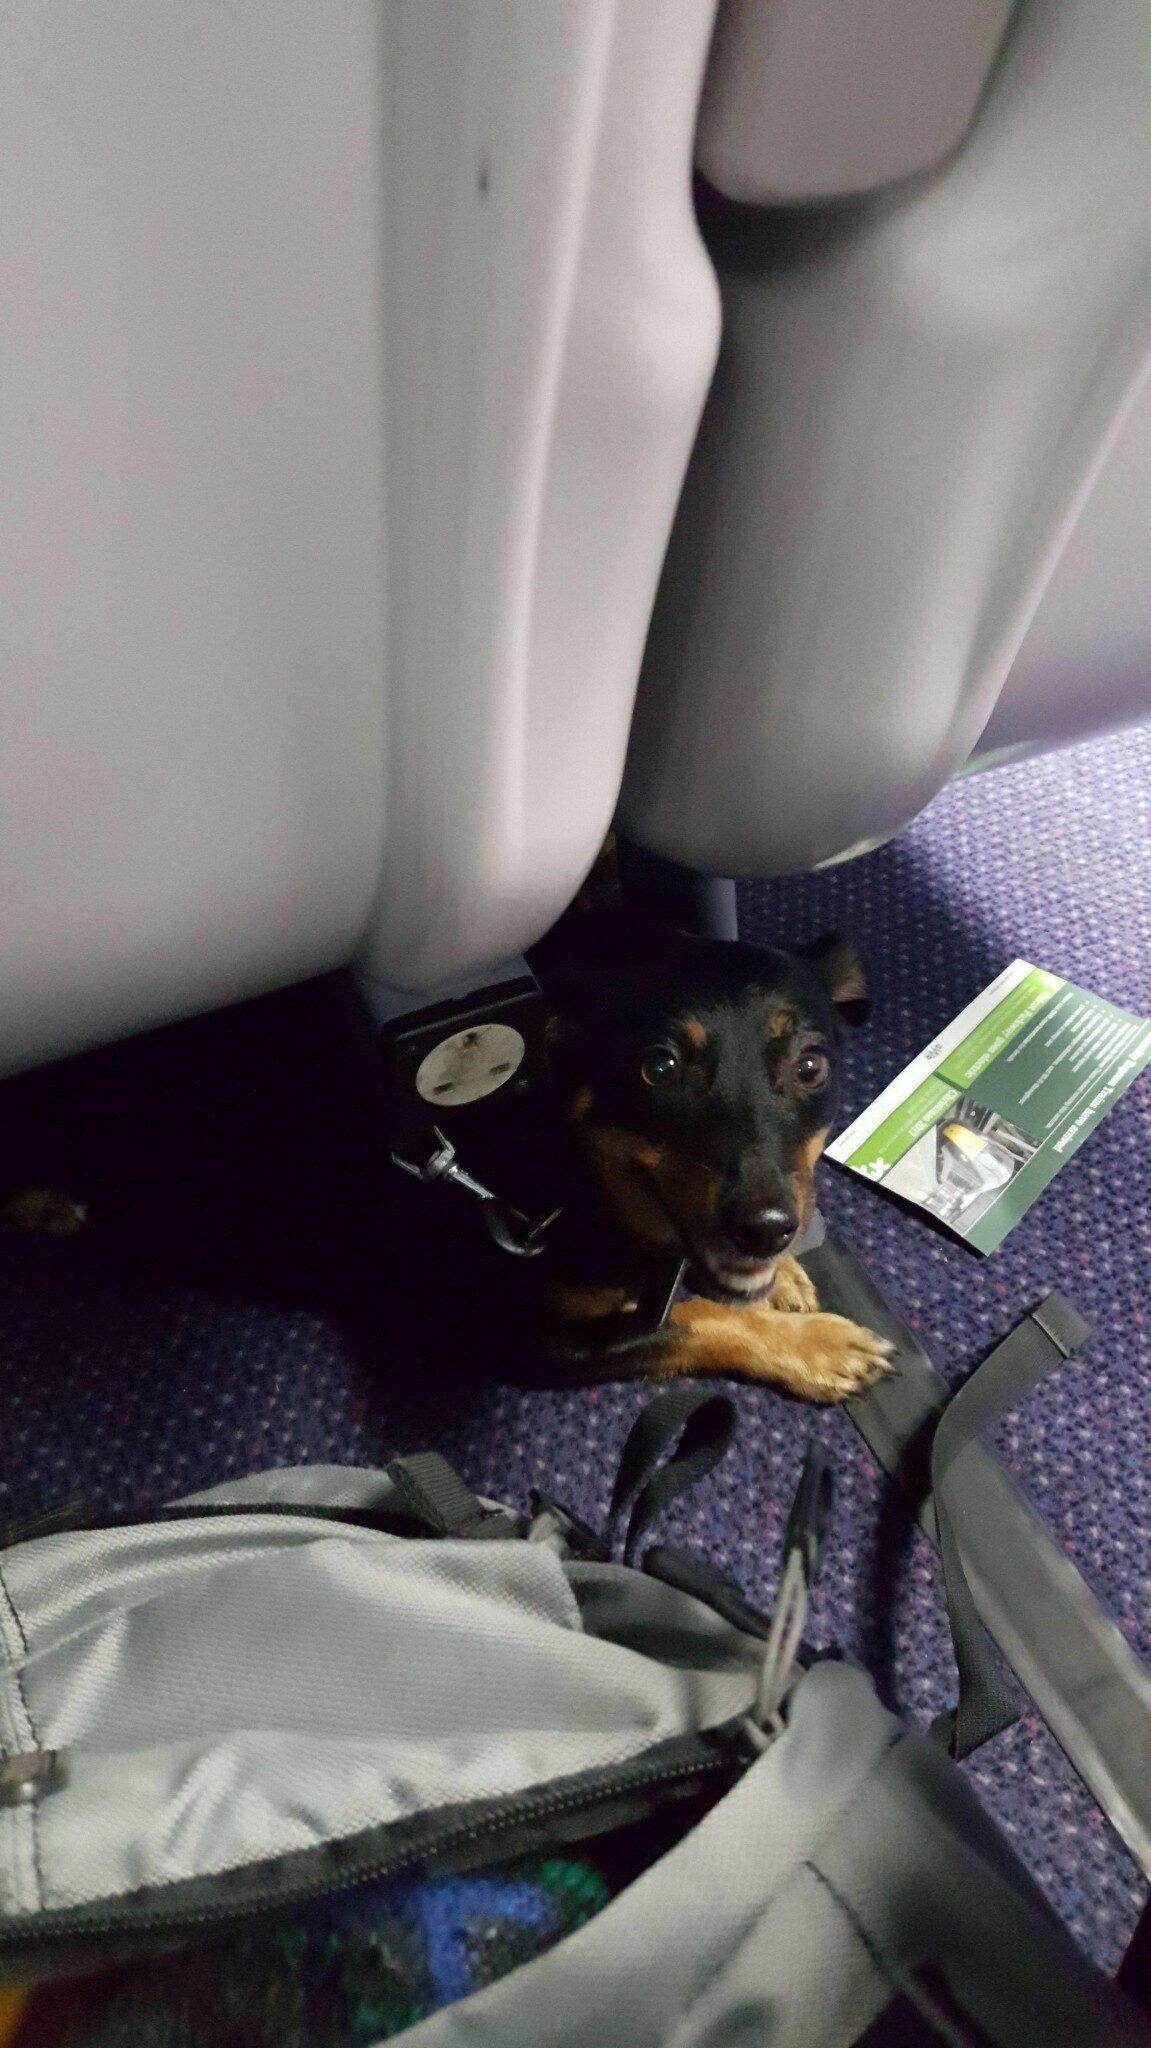 Small black and tan dog peeks out from underneath seat of passenger airliner